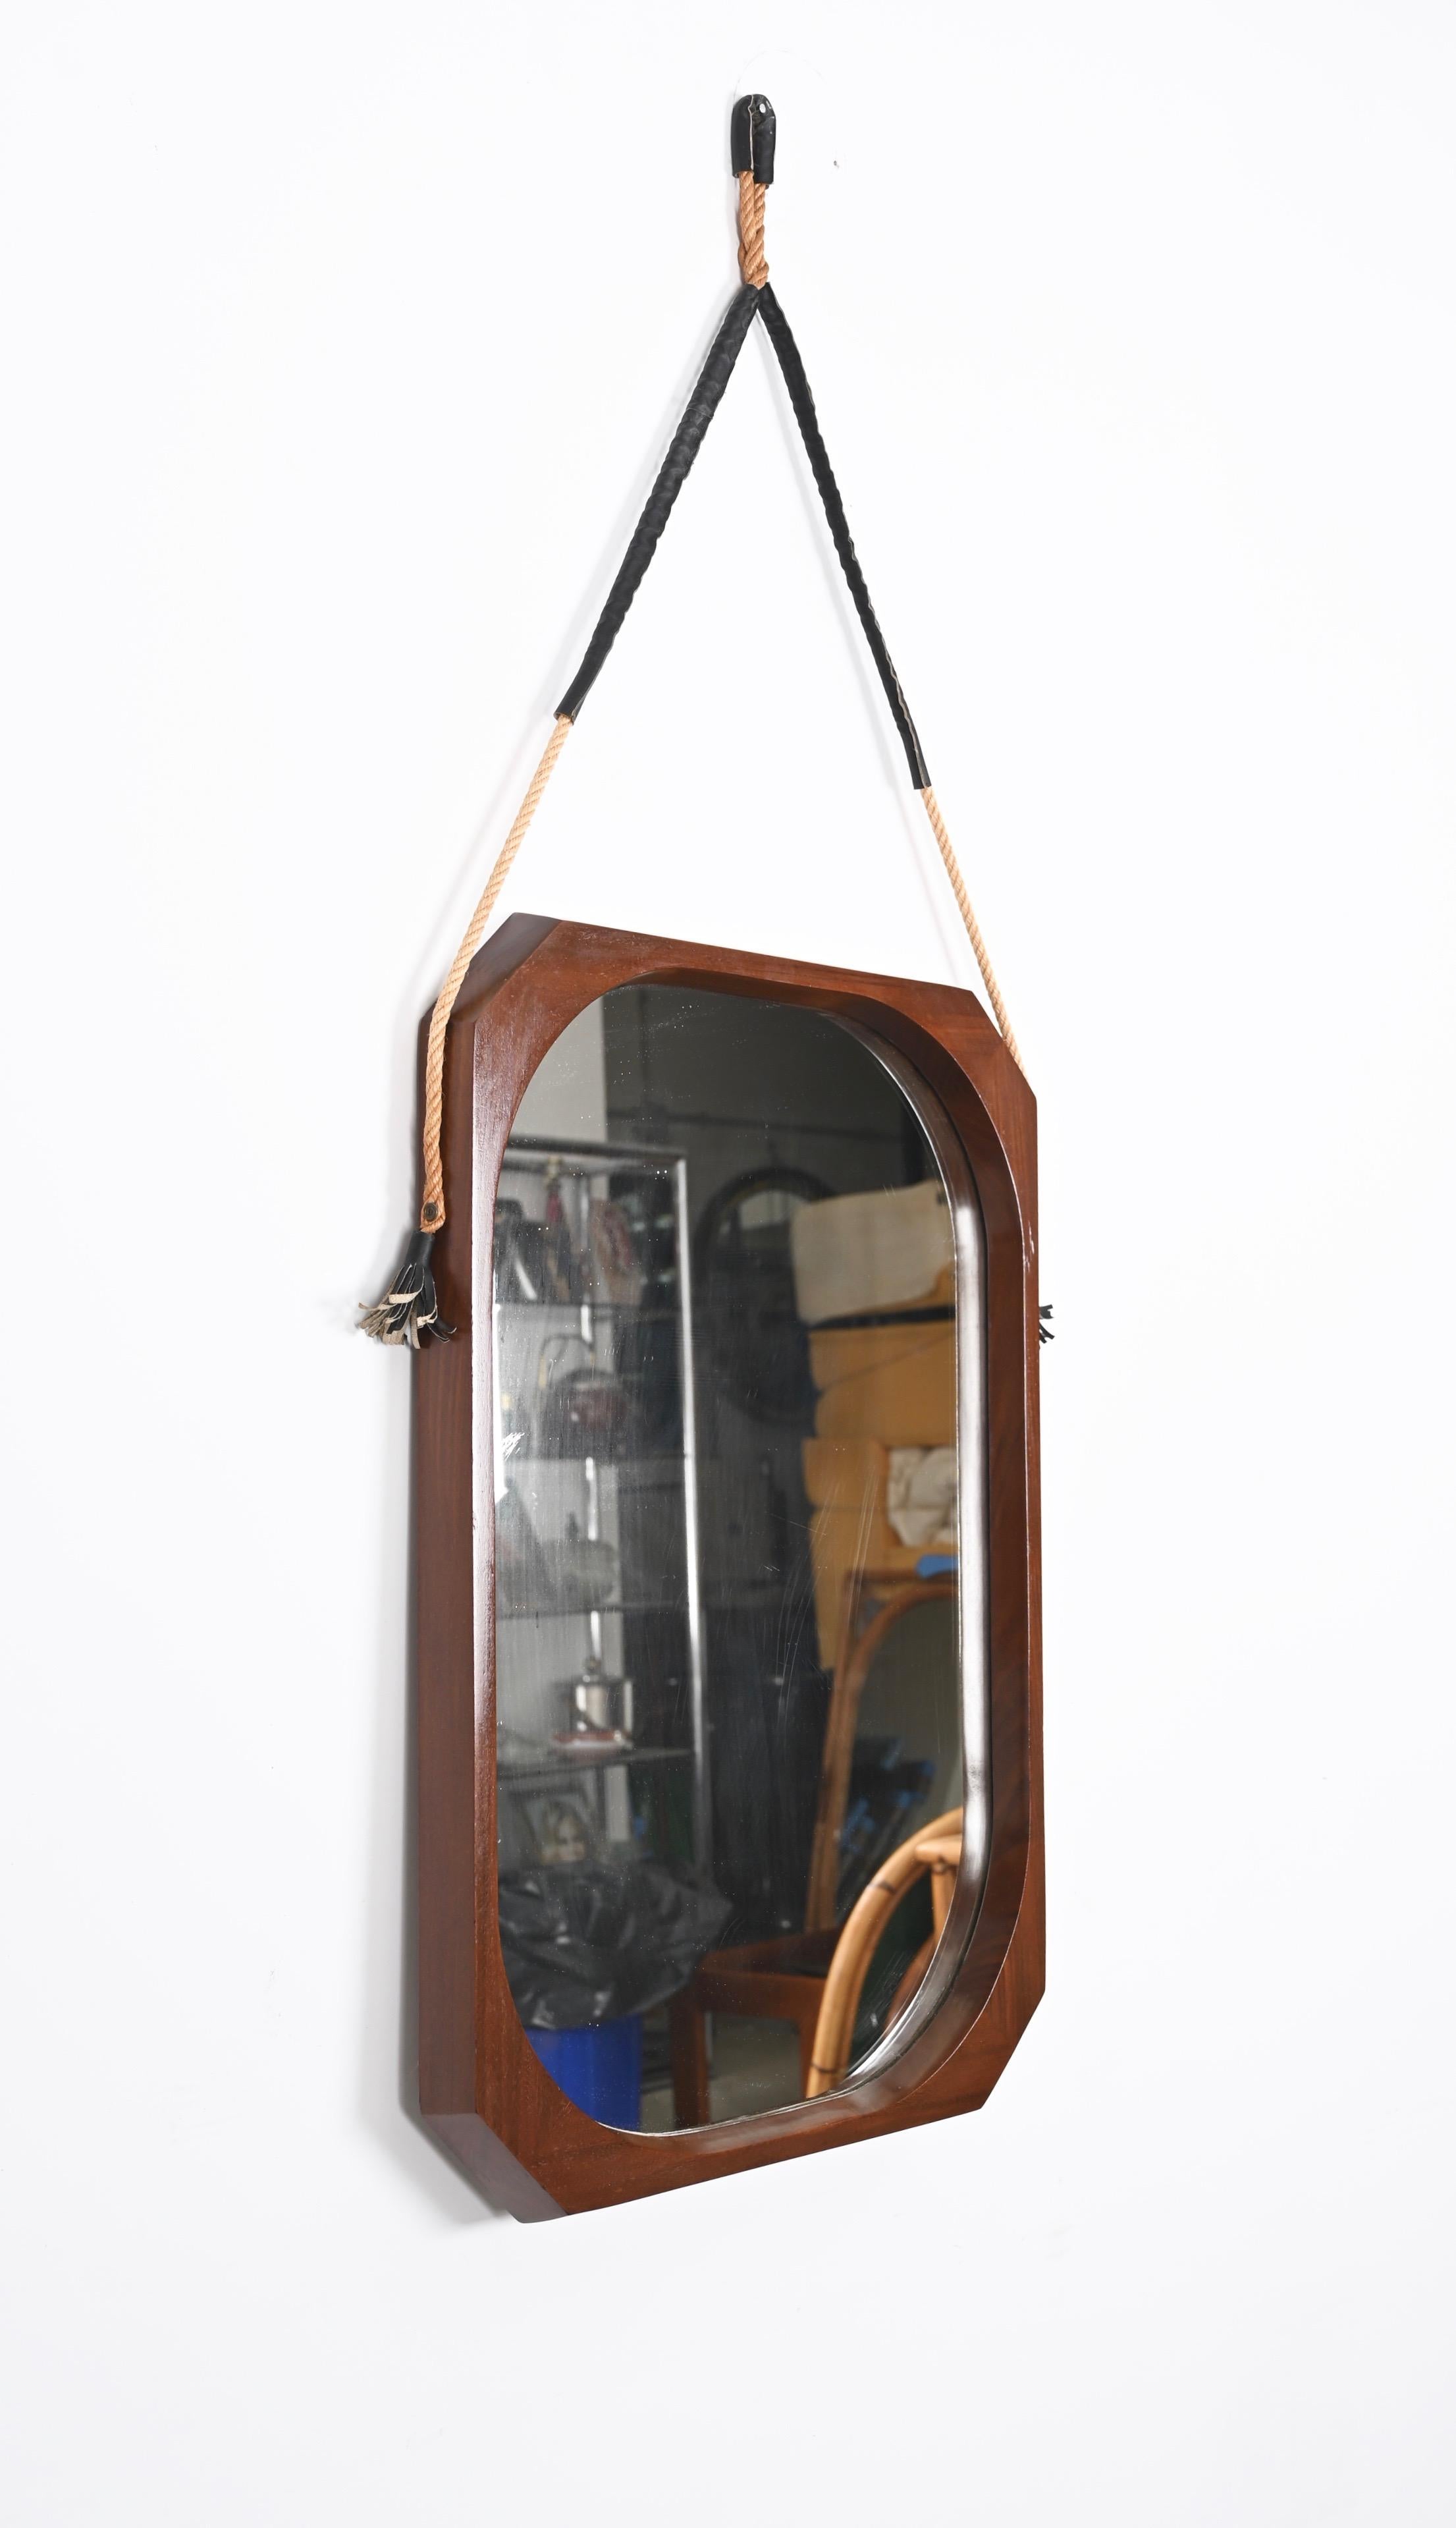 Midcentury Rope and Leather Teak Framed Italian Wall Mirror, 1960s For Sale 2